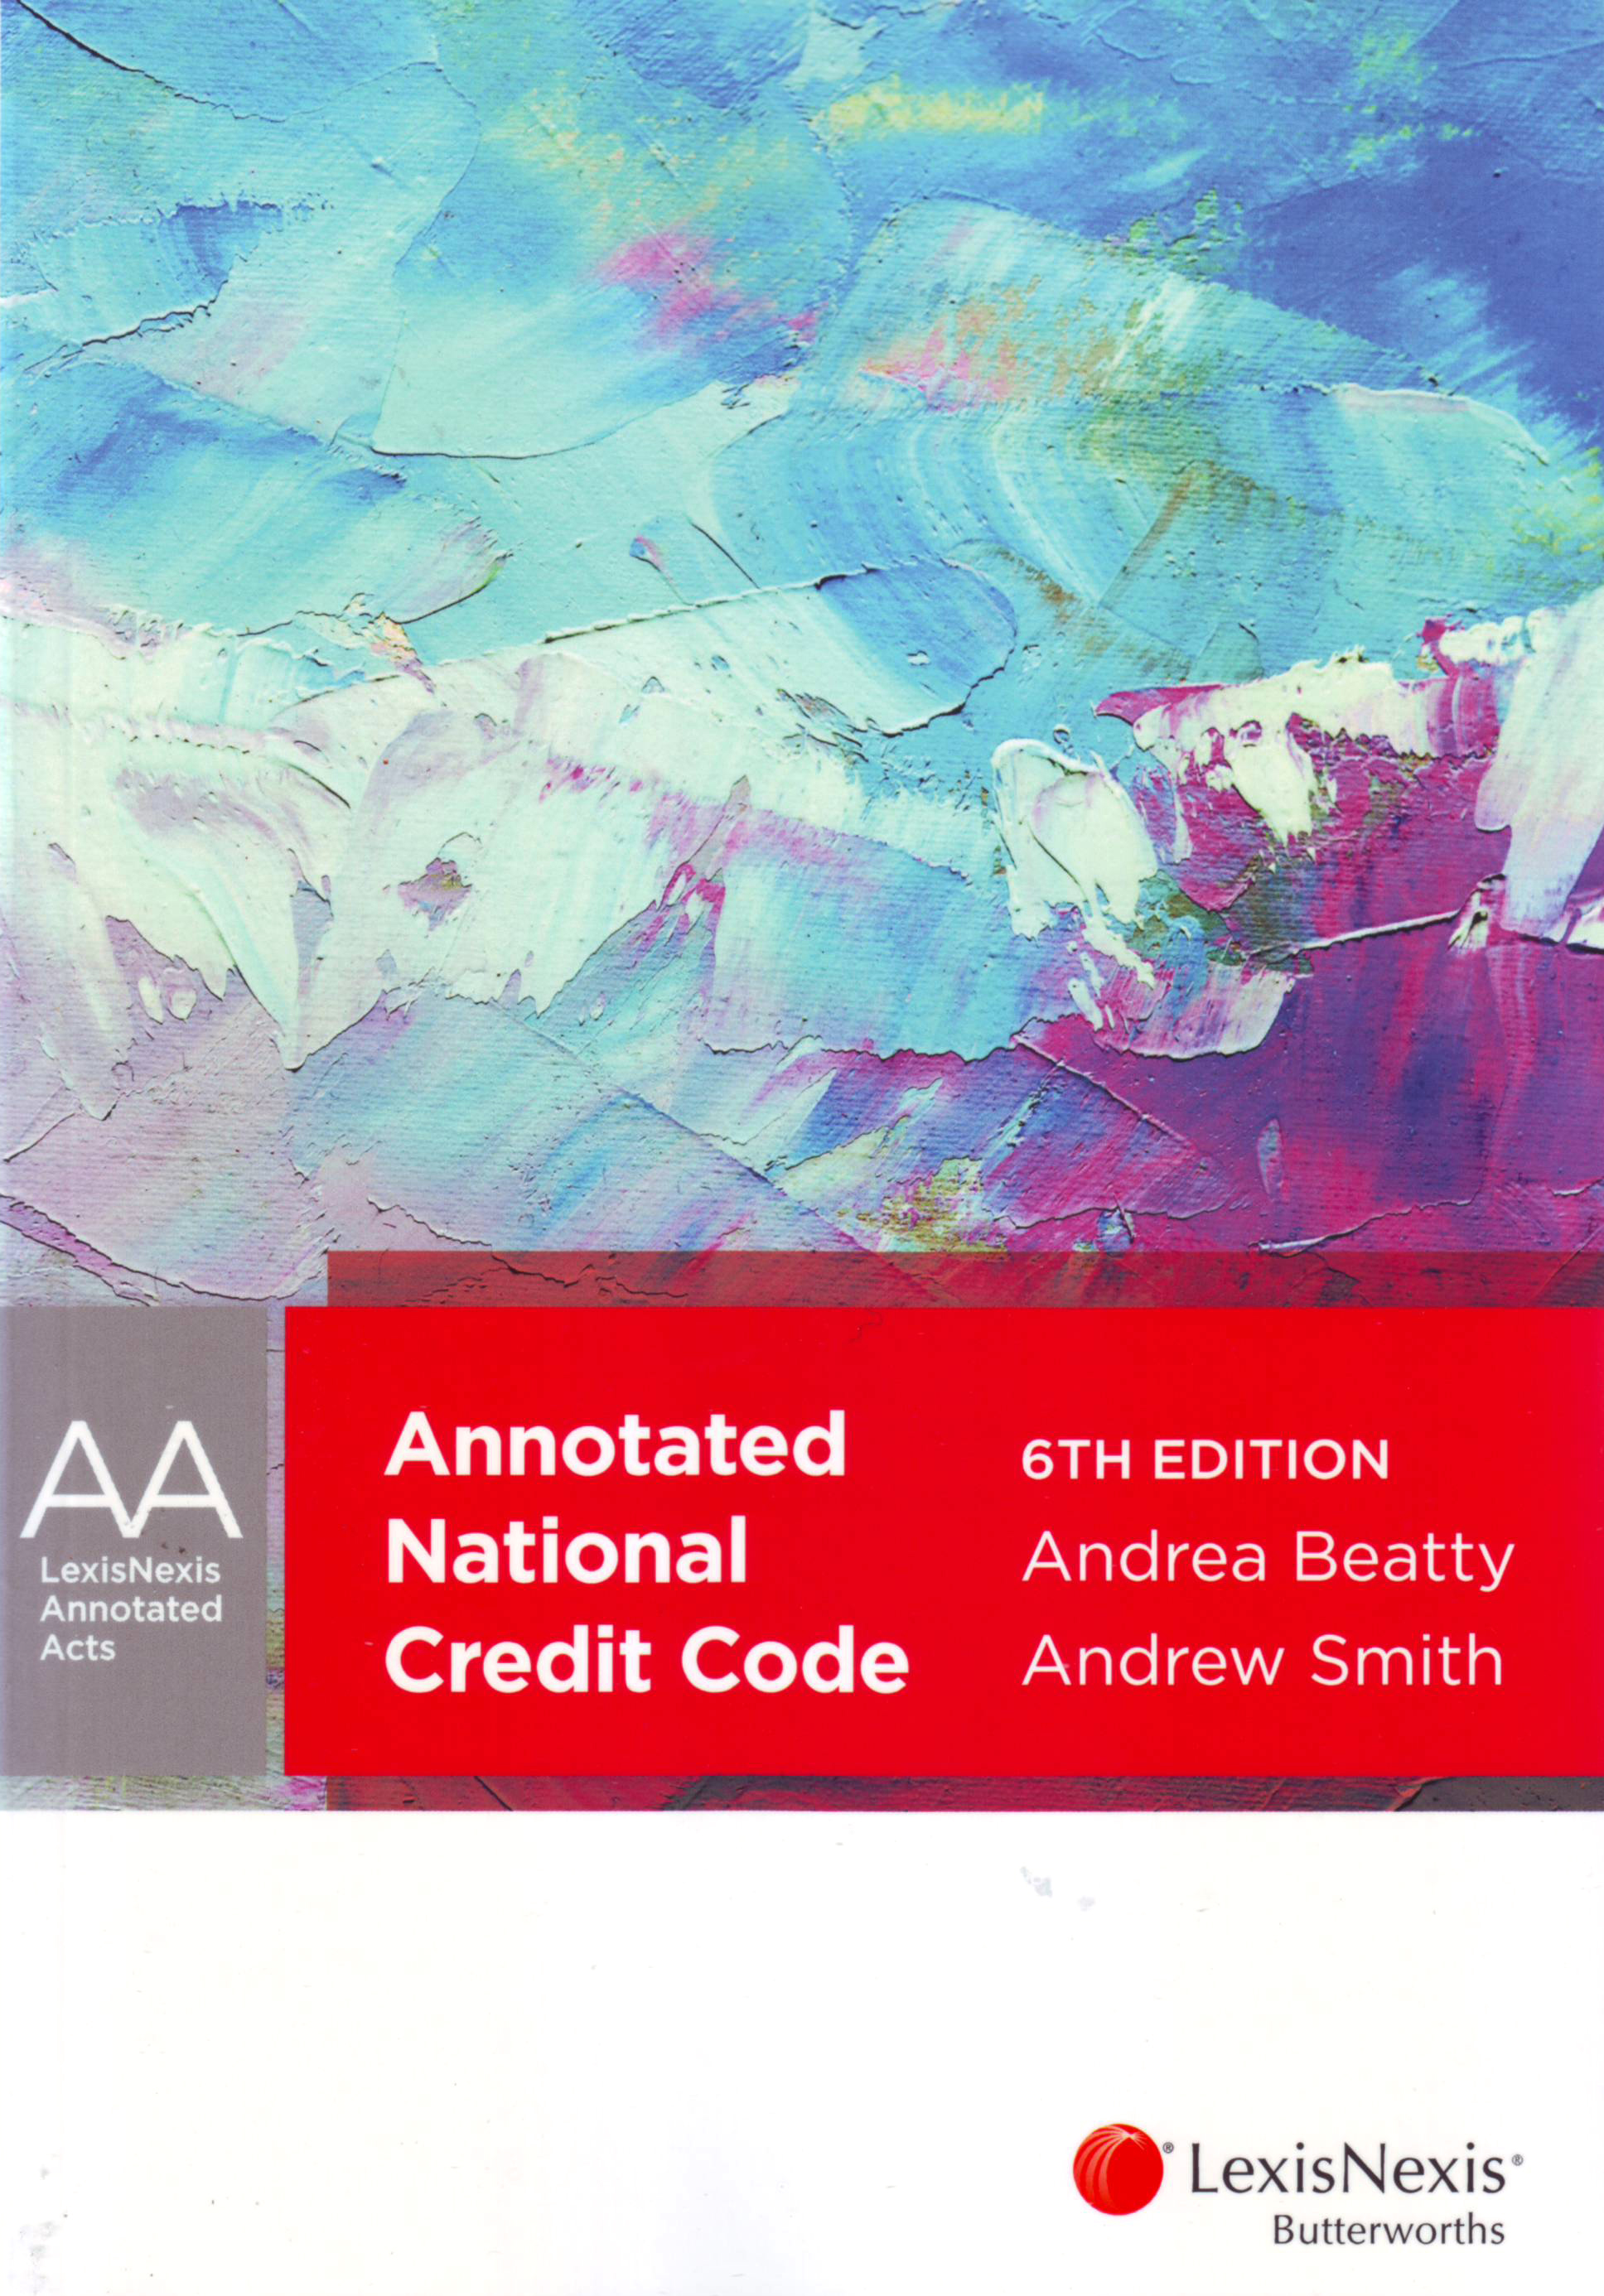 Annotated National Credit Code e6